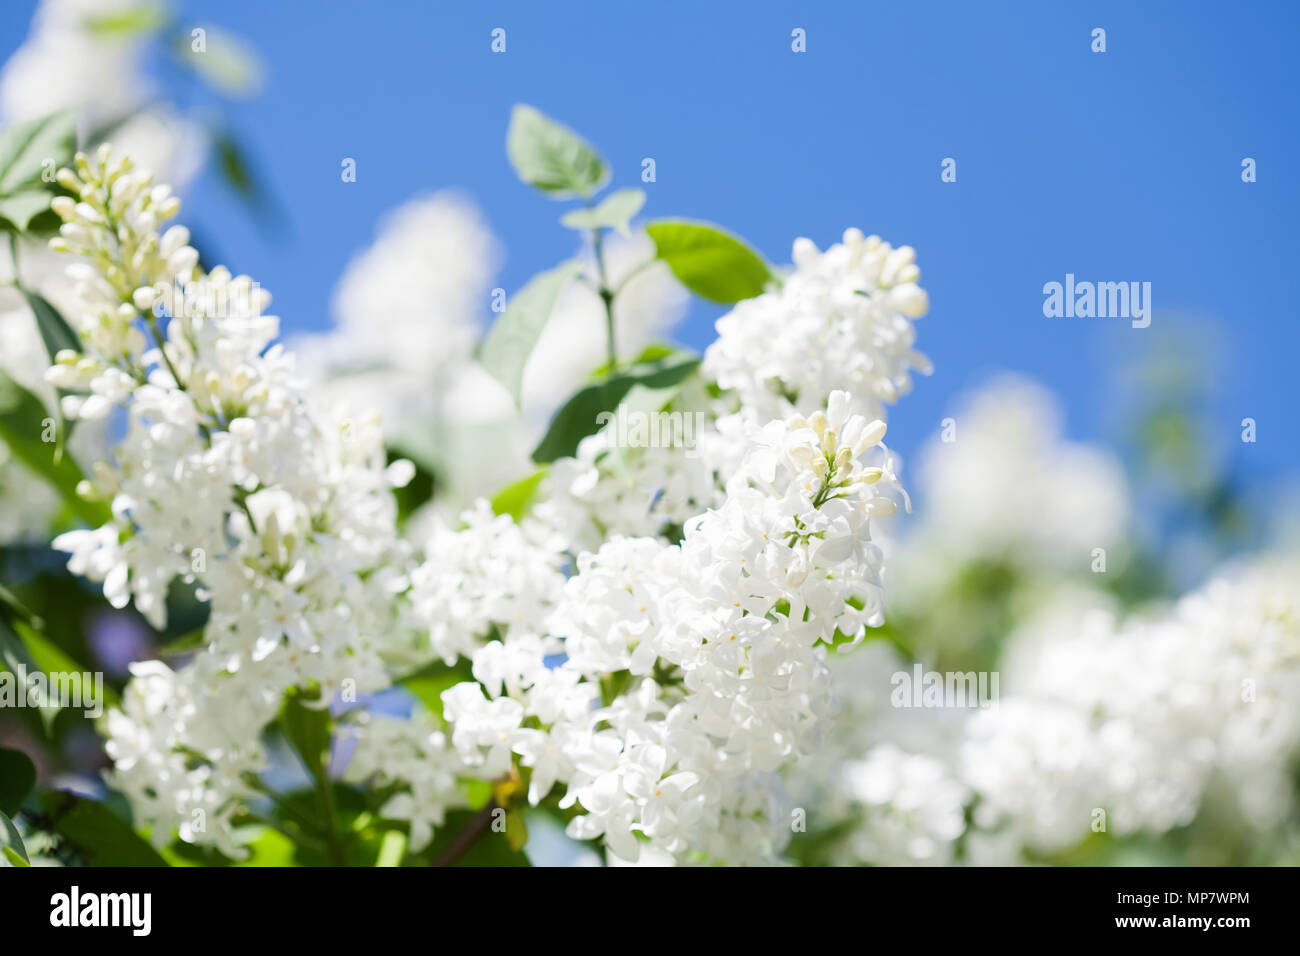 Beautiful spring time floral background with blossoming common Syringa vulgaris lilacs bush white cultivar. Springtime landscape with bunch of tender flowers. lily-white blooming plants background against blue sky. Sof focus Stock Photo